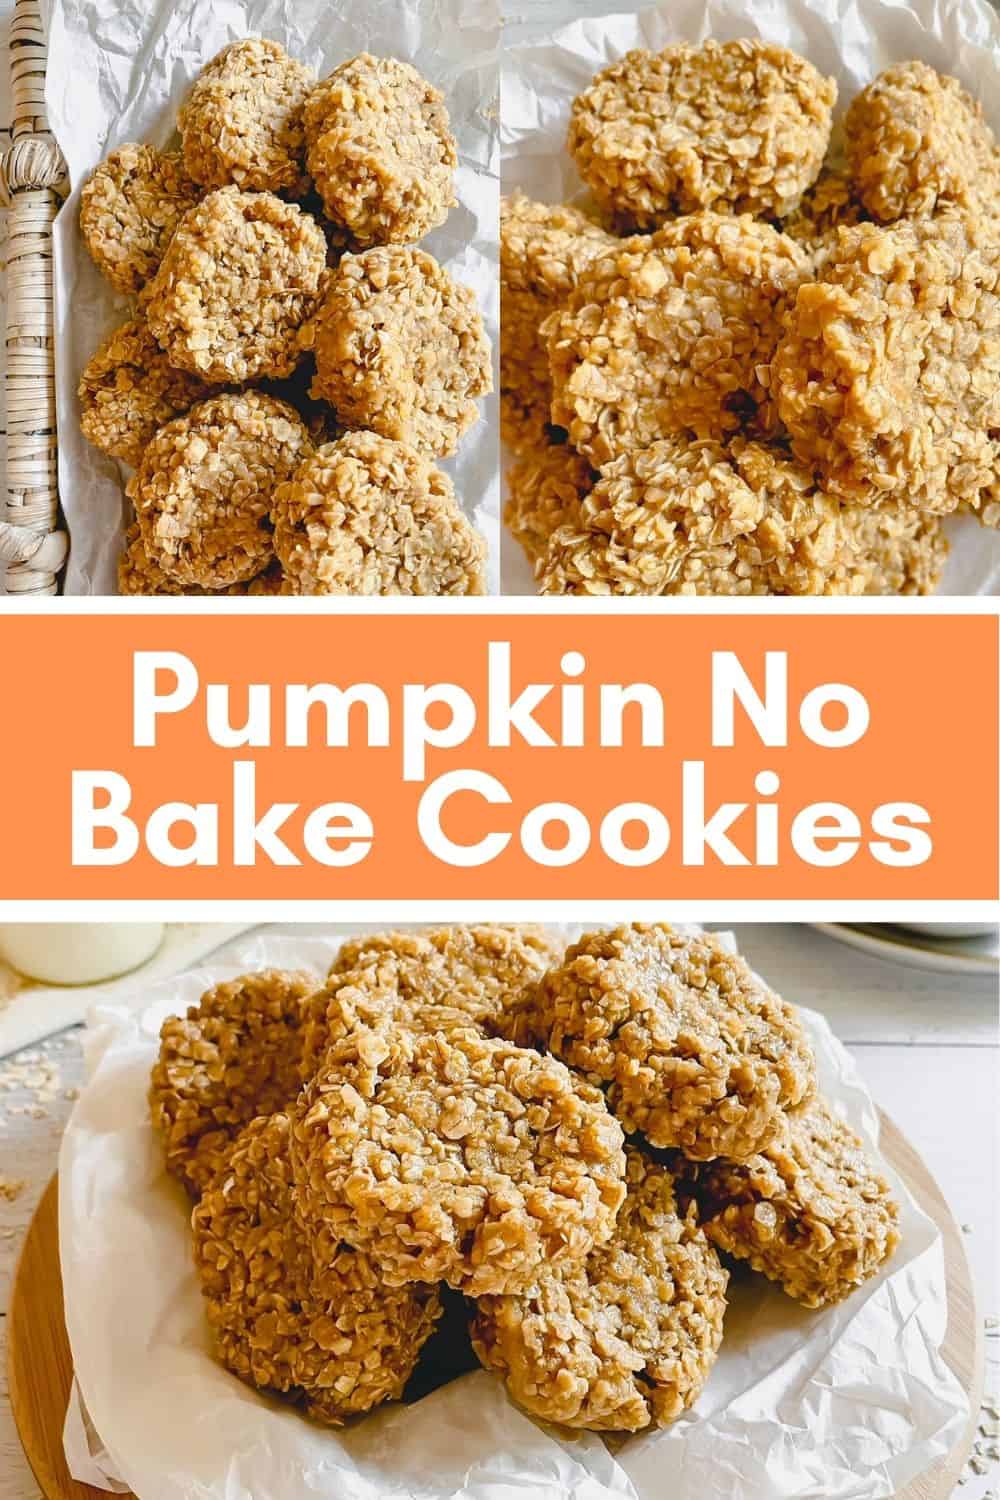 Pinterest image.  Shows three different images of the finished pumpkin cookies with a text overlay of the name of the cookies.